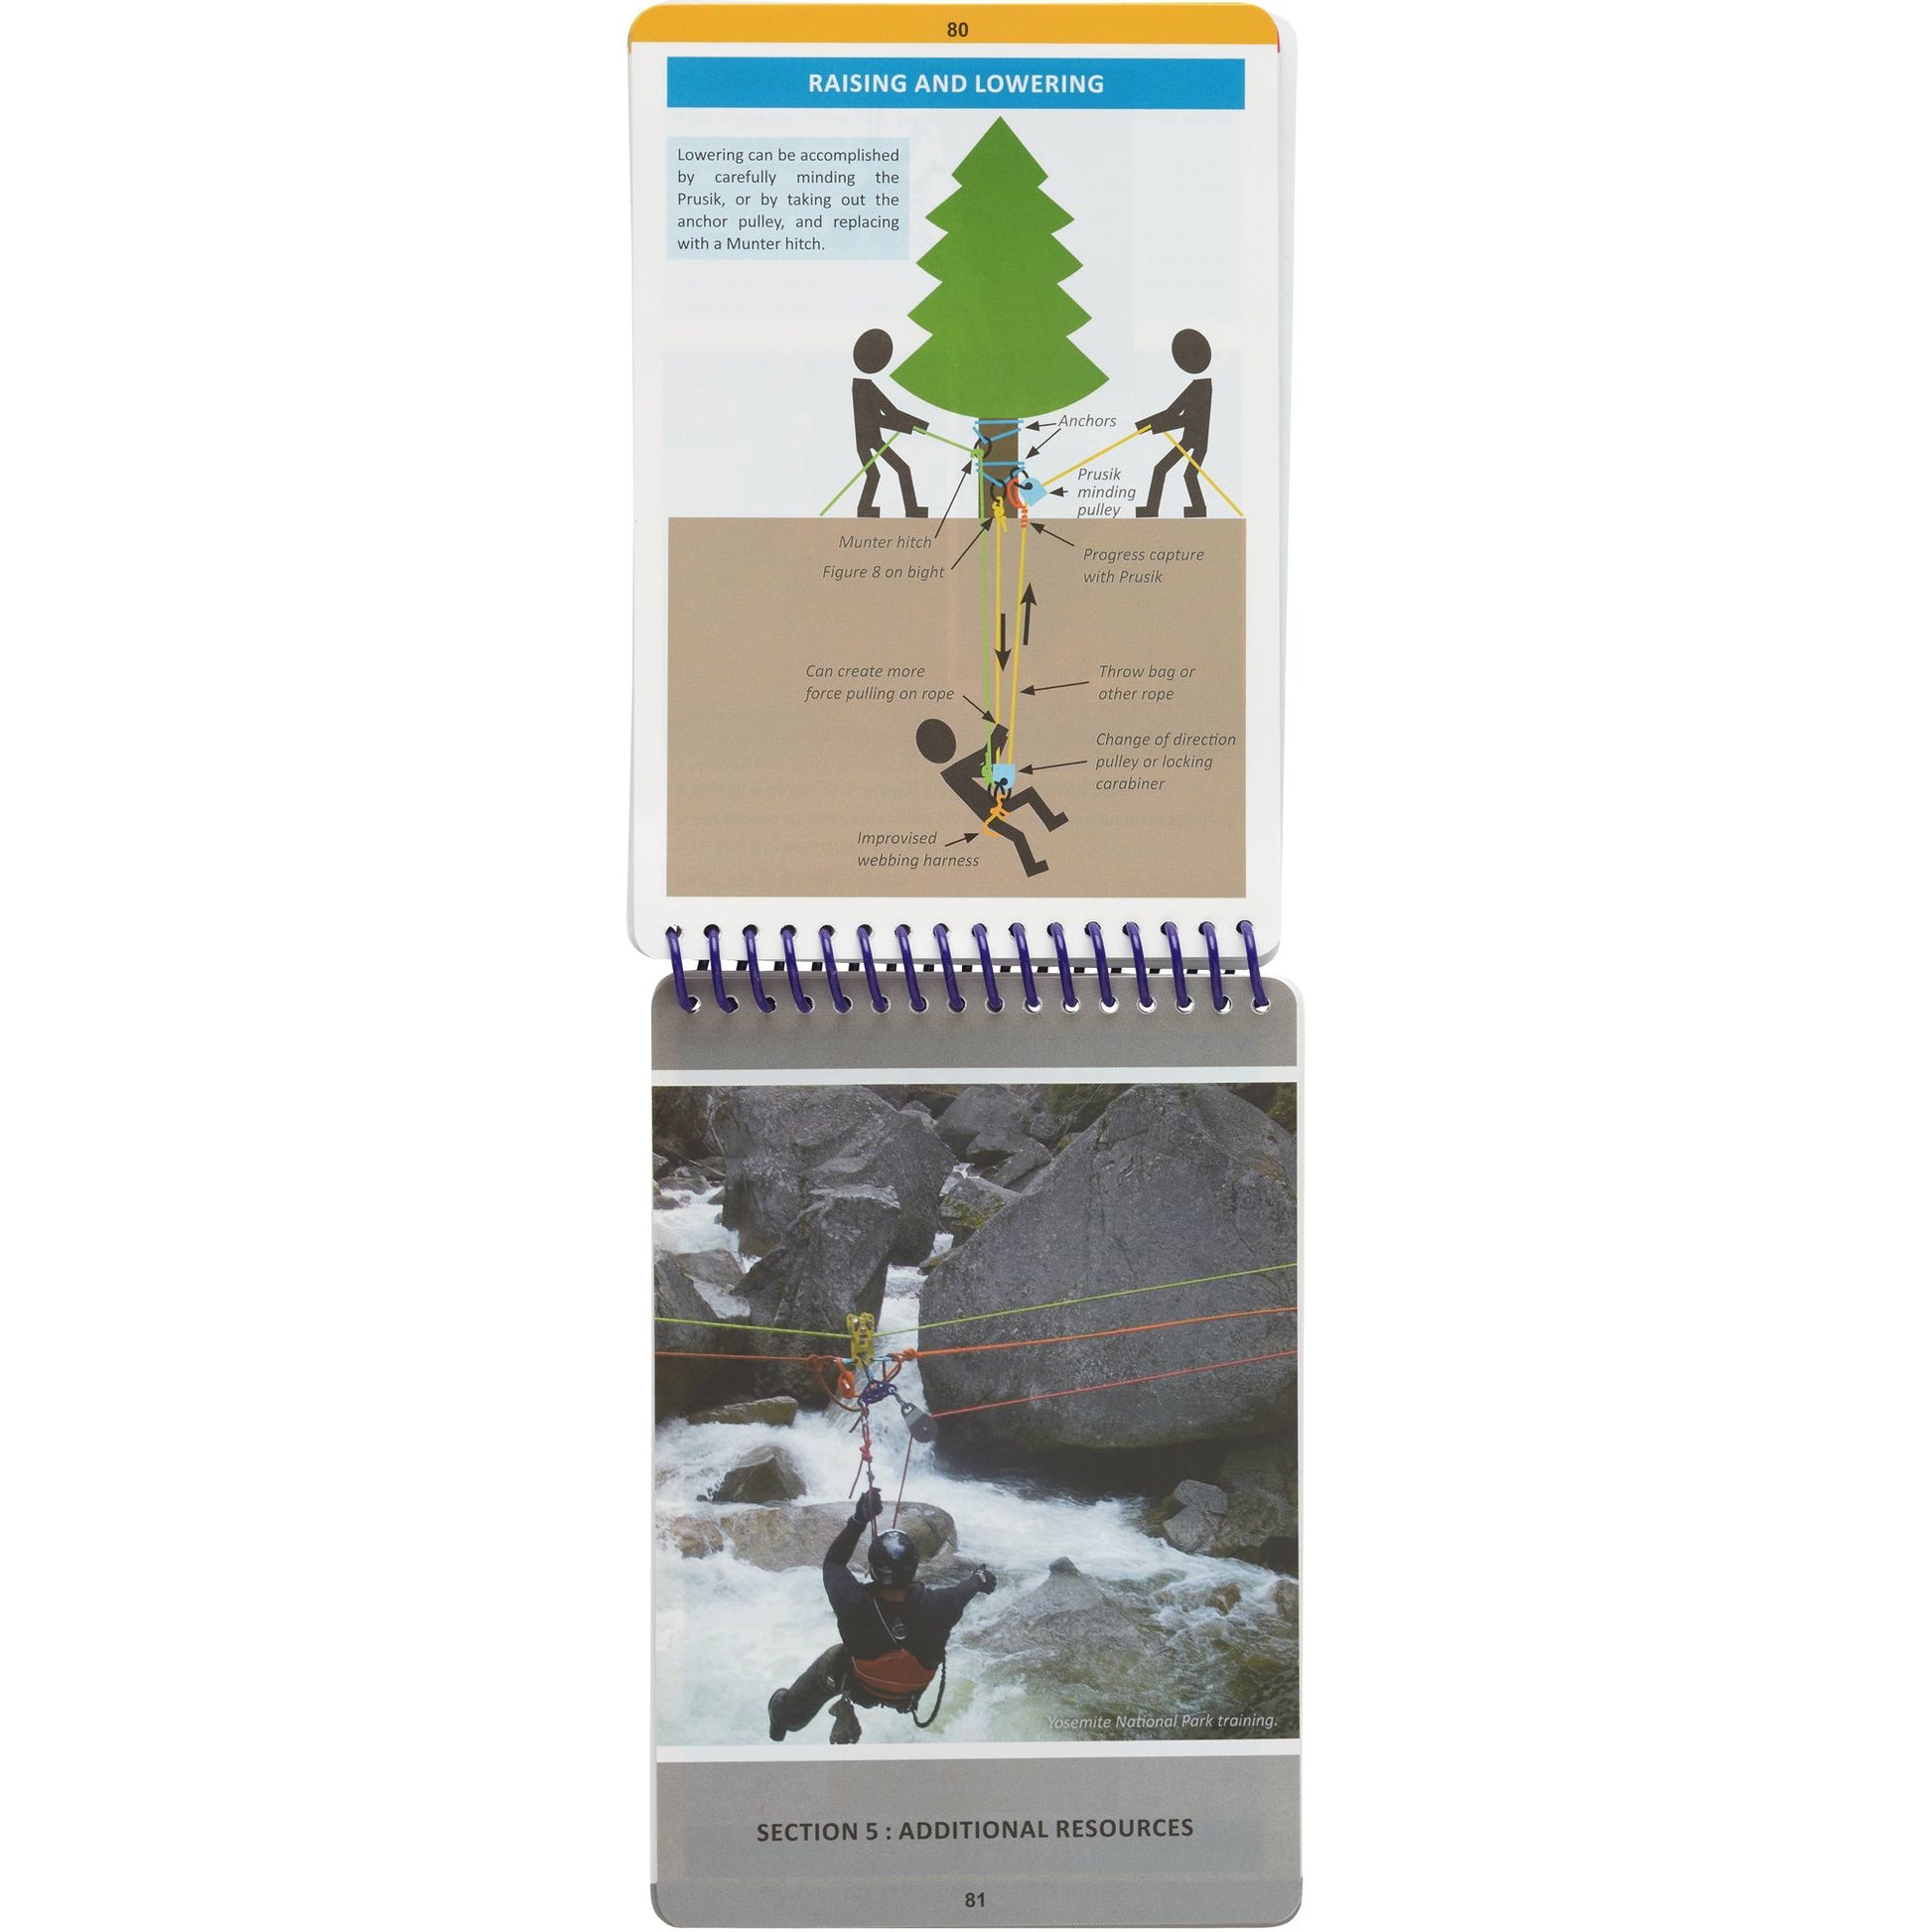 A Sierra Rescue River Rescue and Safety Field Guide with a picture of a person climbing a tree.